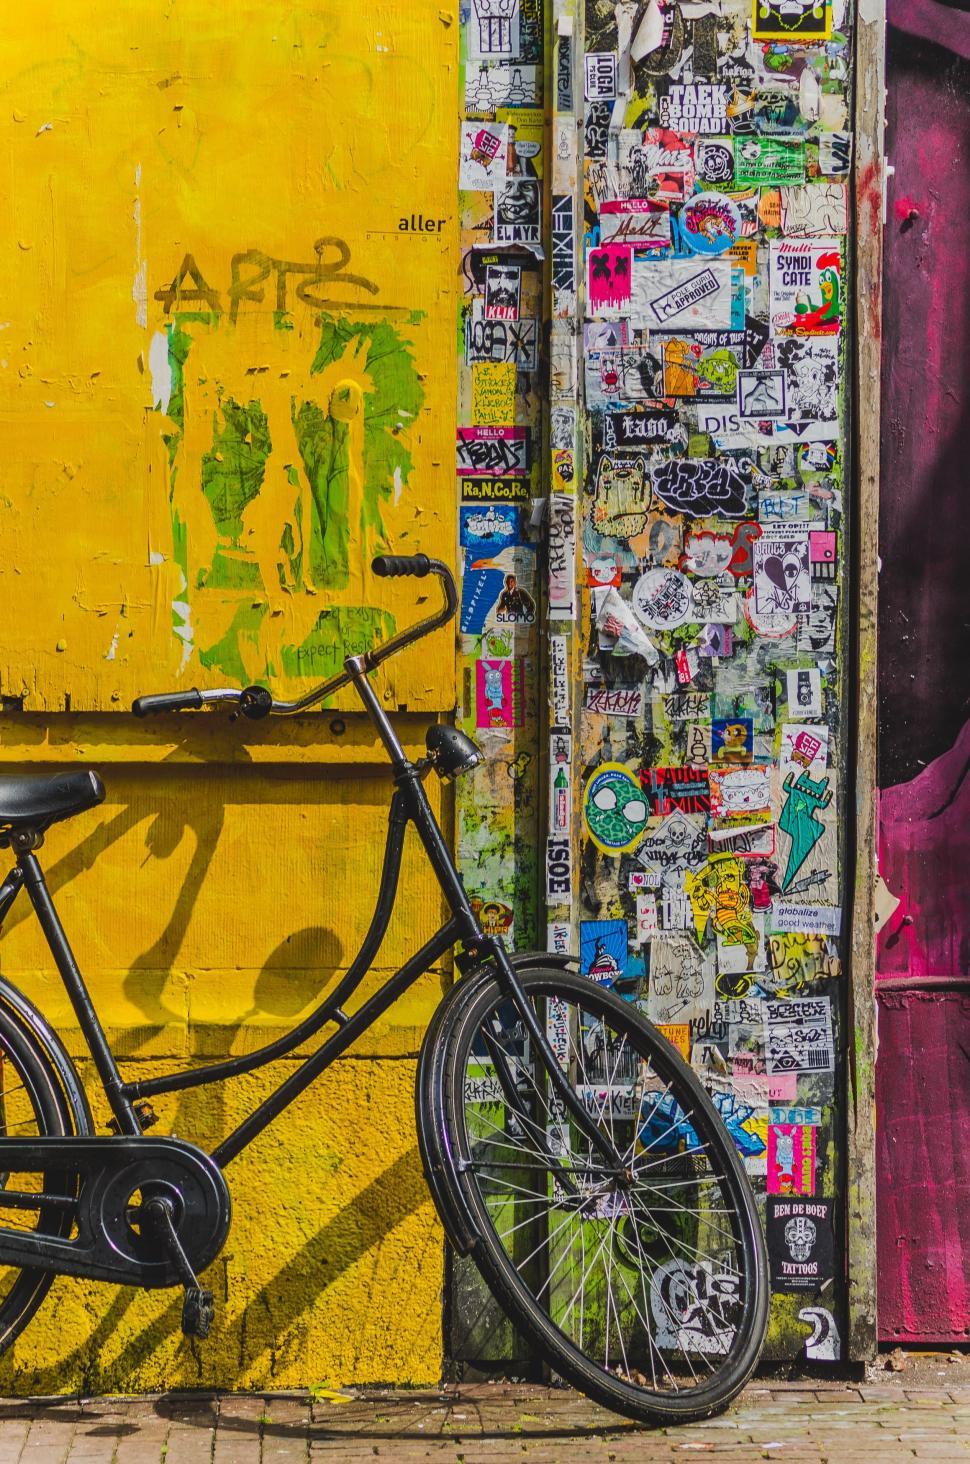 Free Image of Bicycle Parked Next to Sticker-Covered Wall 